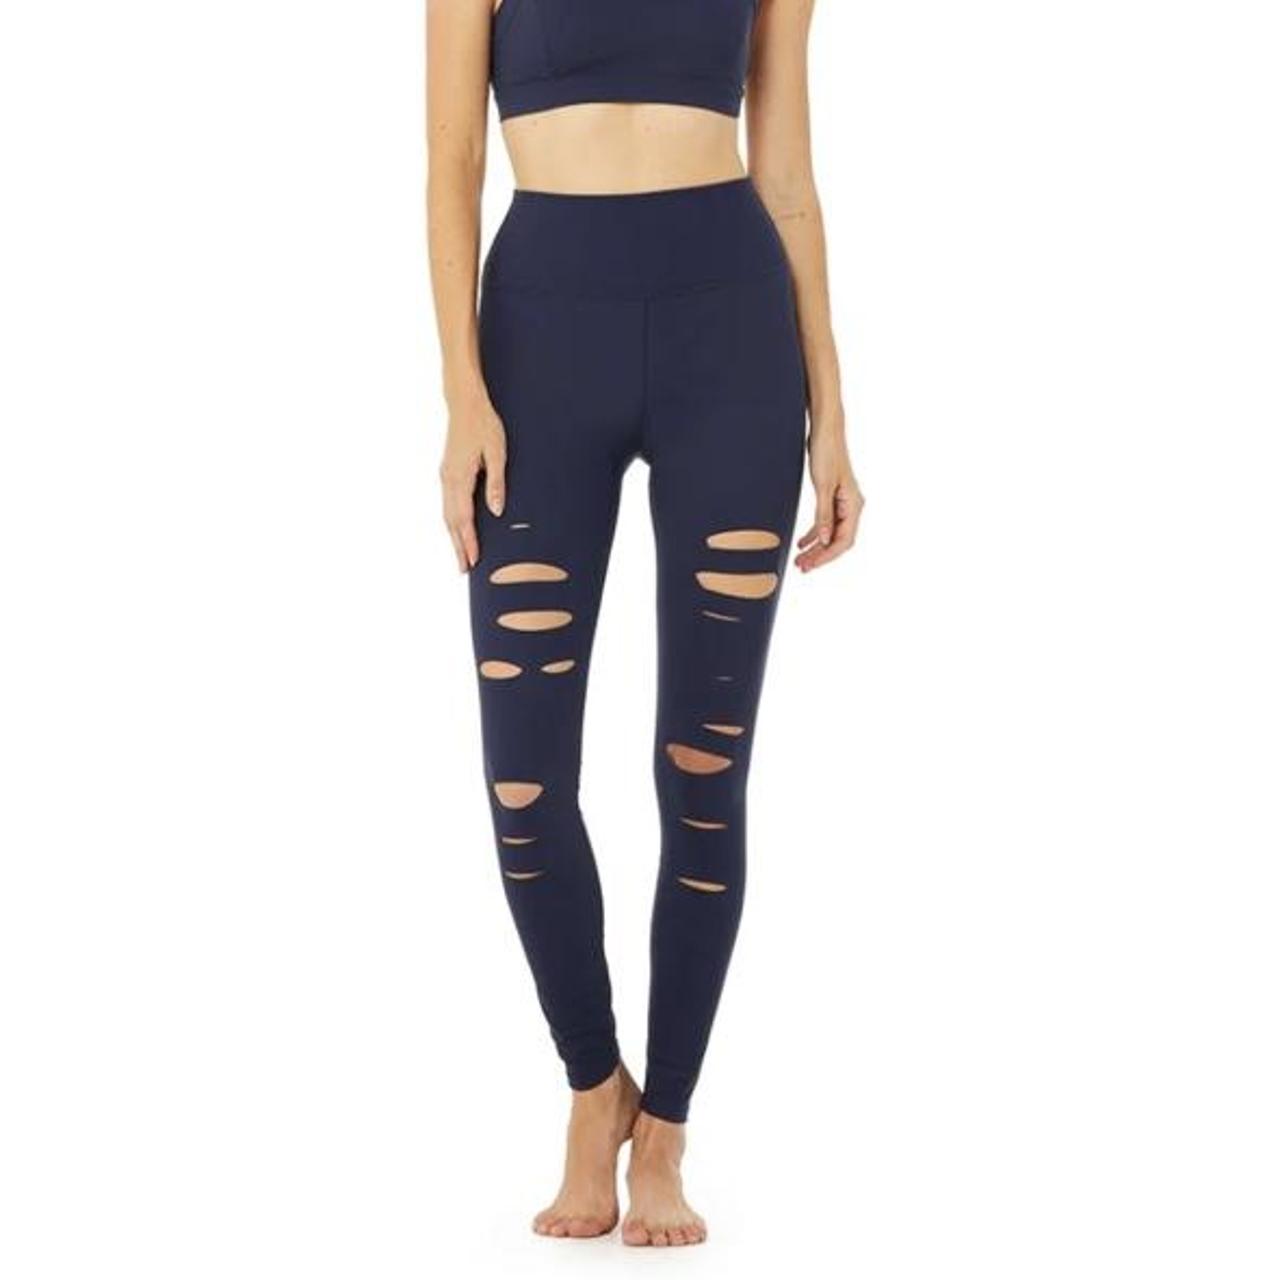 Alo high waisted ripped warrior leggings Size xs - Depop